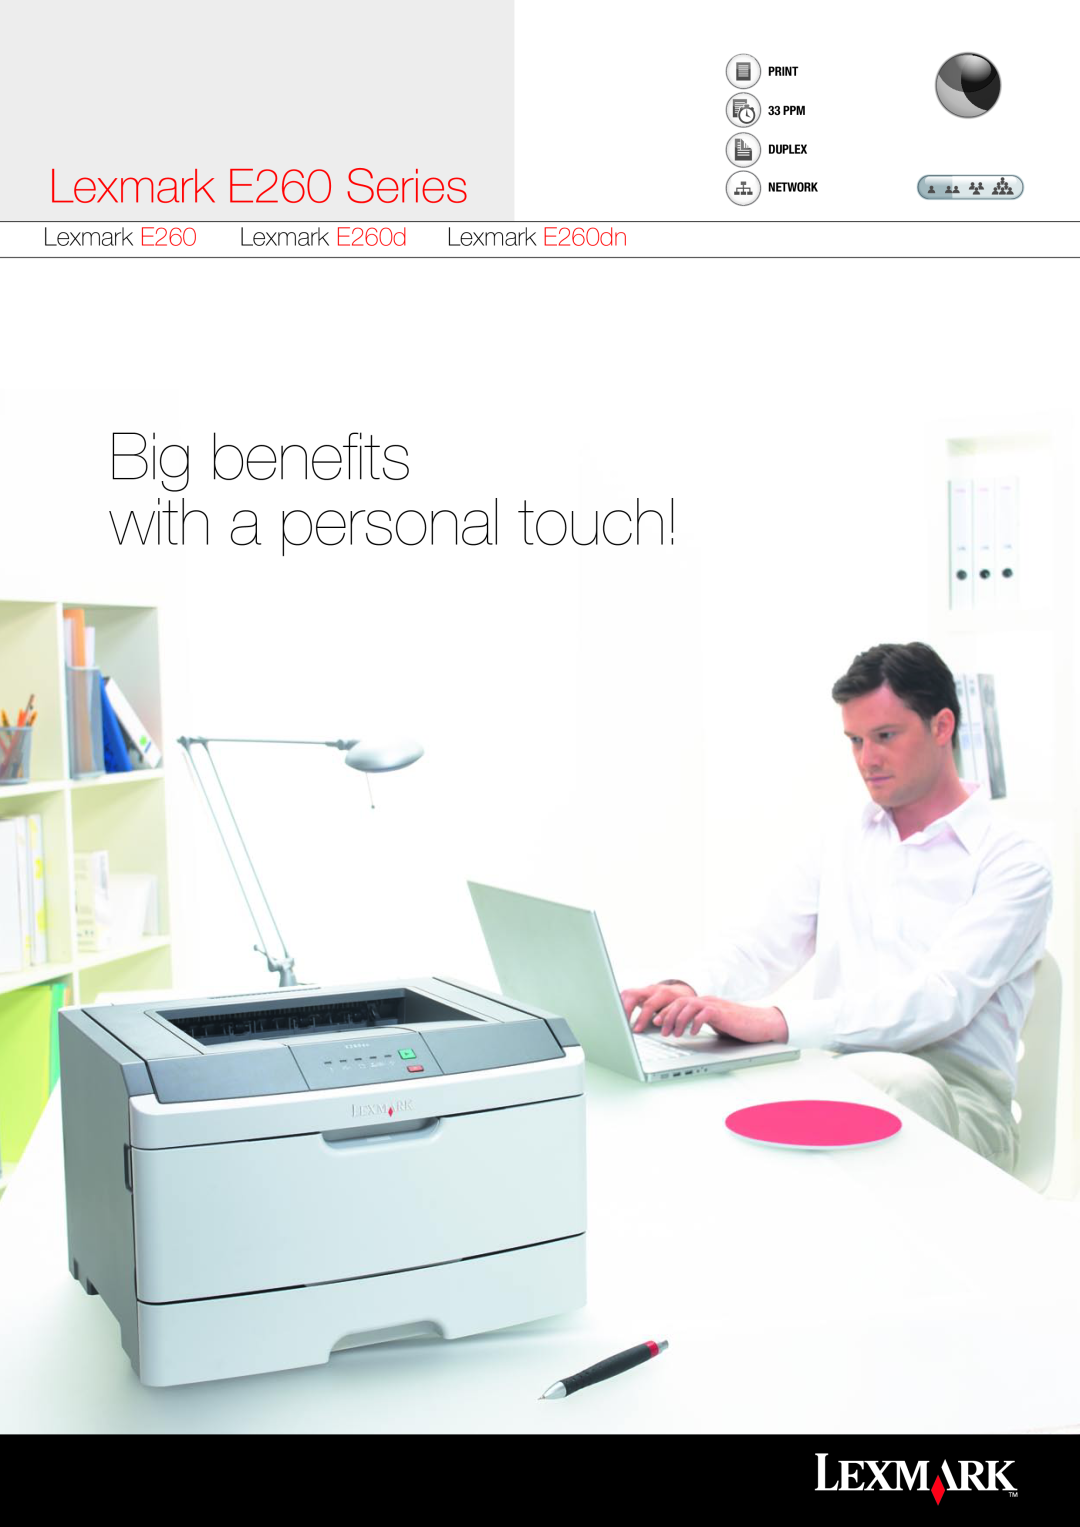 Lexmark manual Big benefits with a personal touch, Lexmark E260 Series, Lexmark E260d Lexmark E260dn 